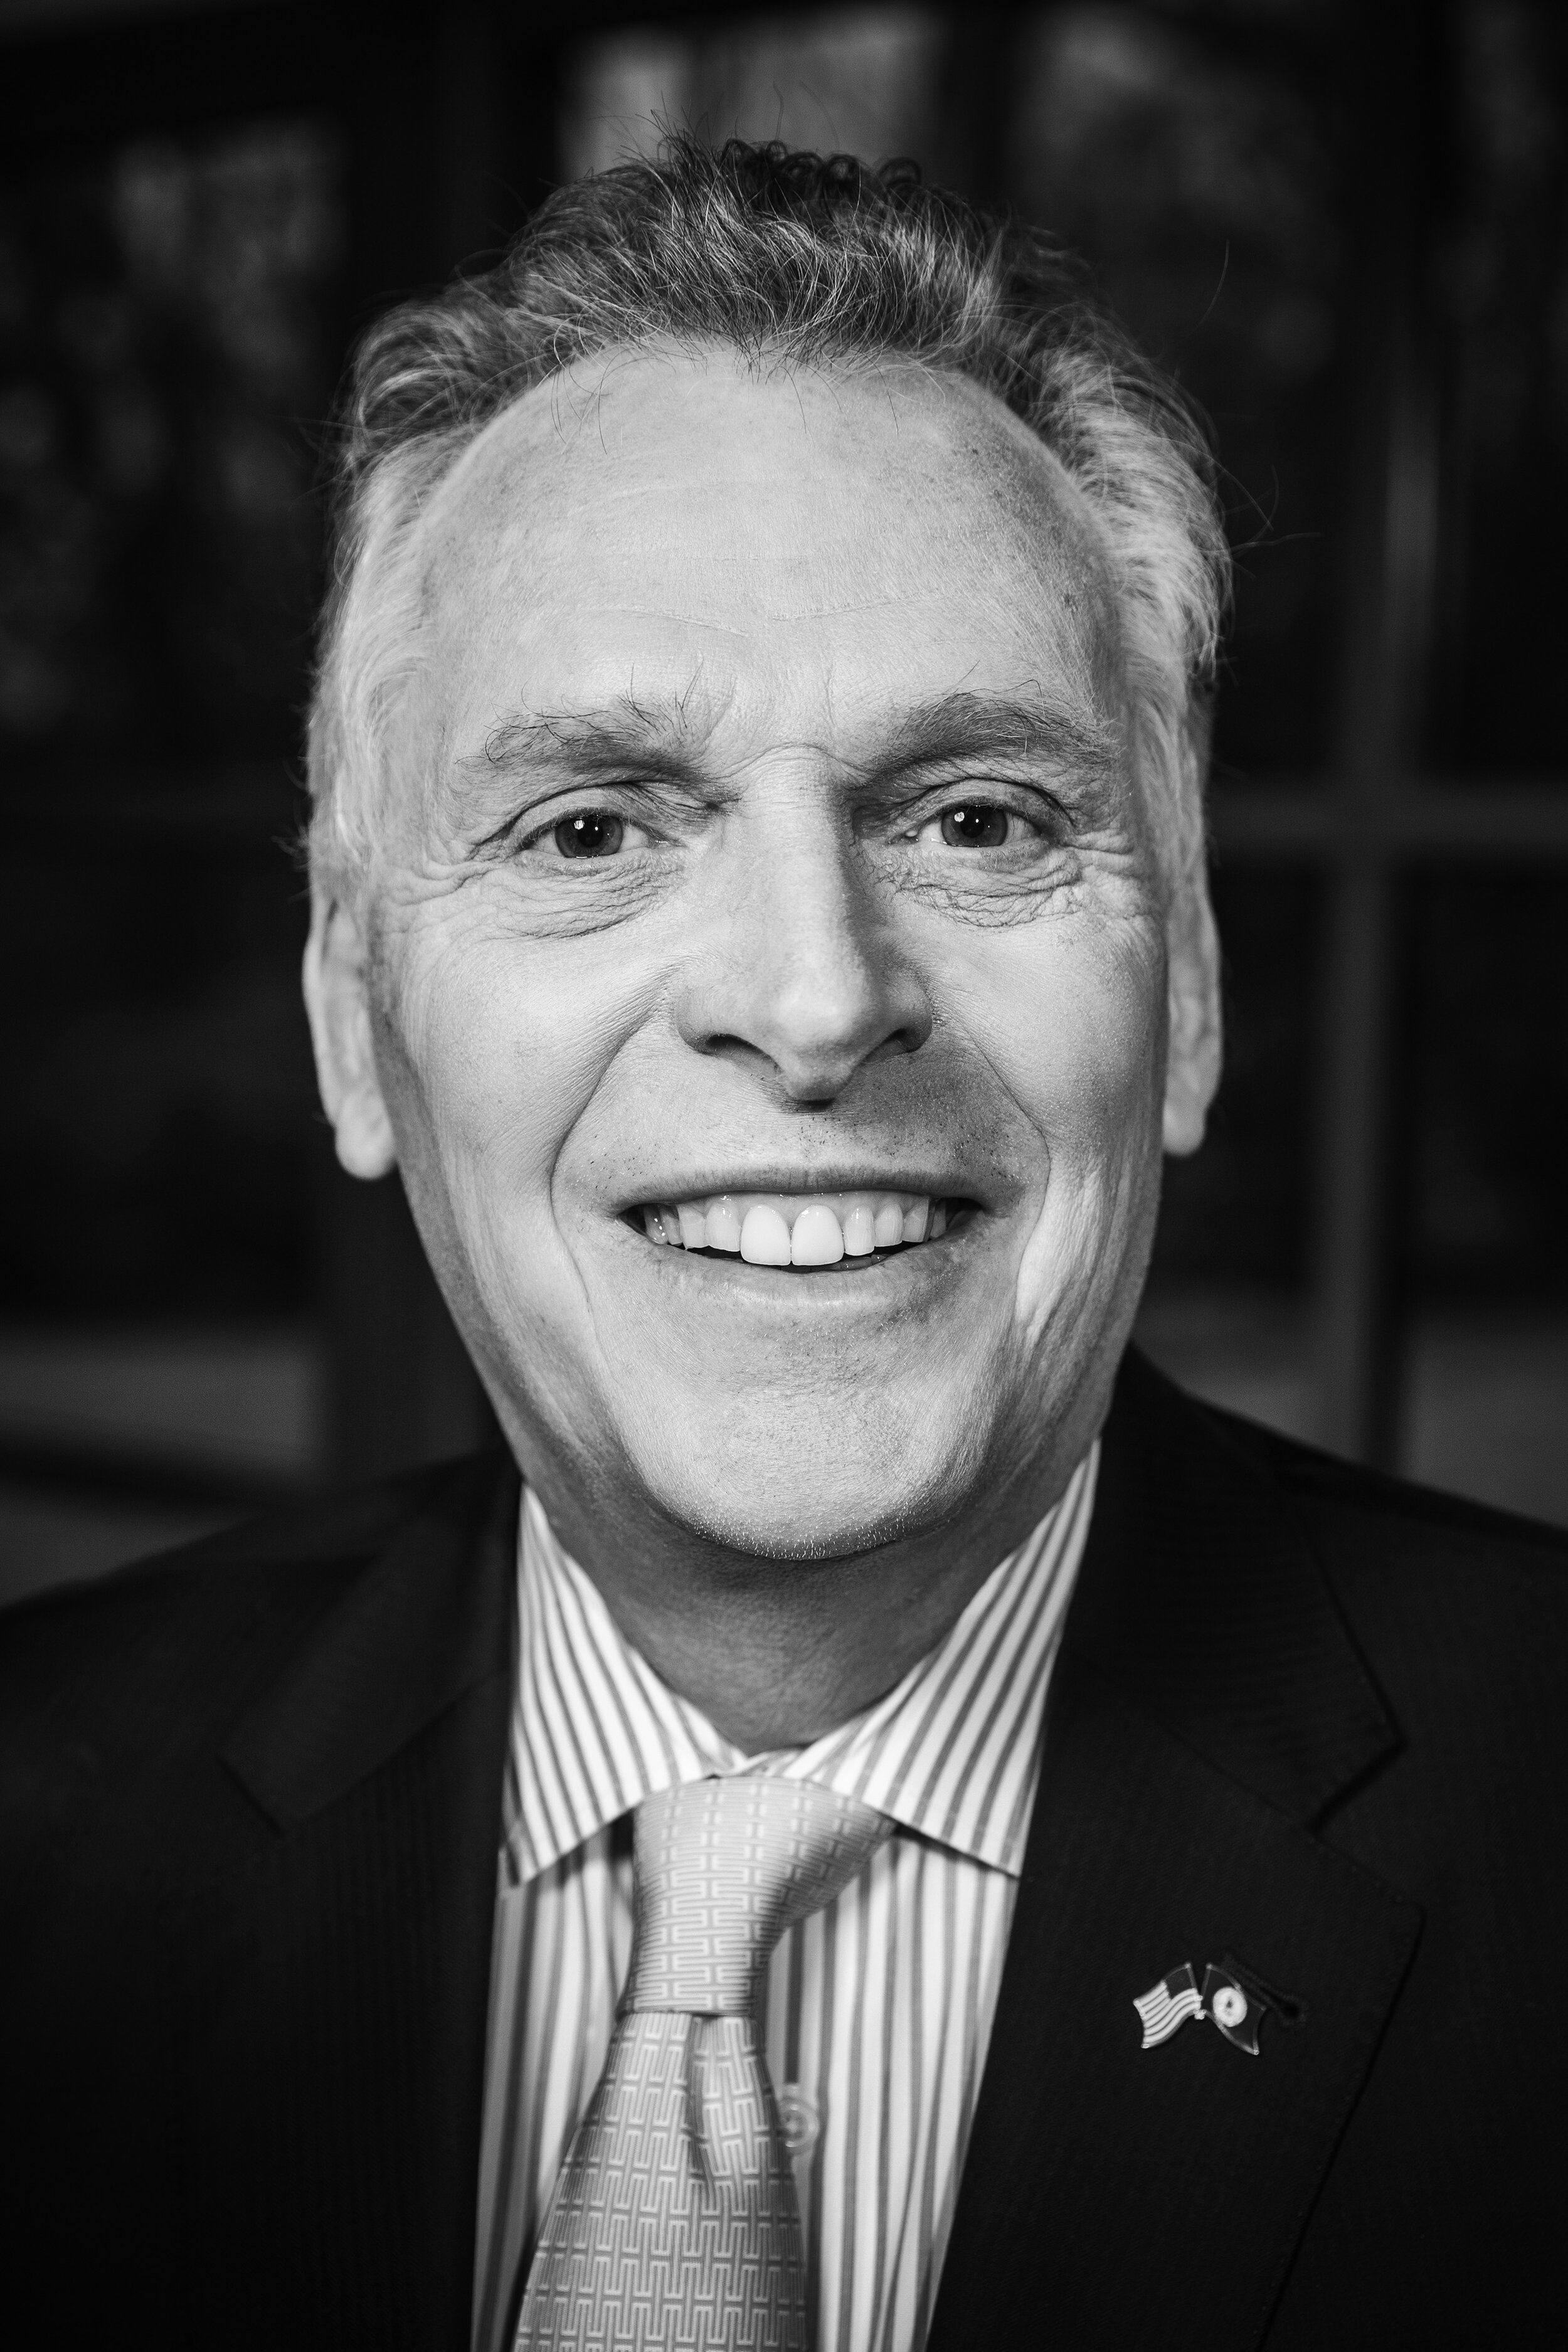 Terry McAuliffe, Former Governor of the Commonwealth of Virginia